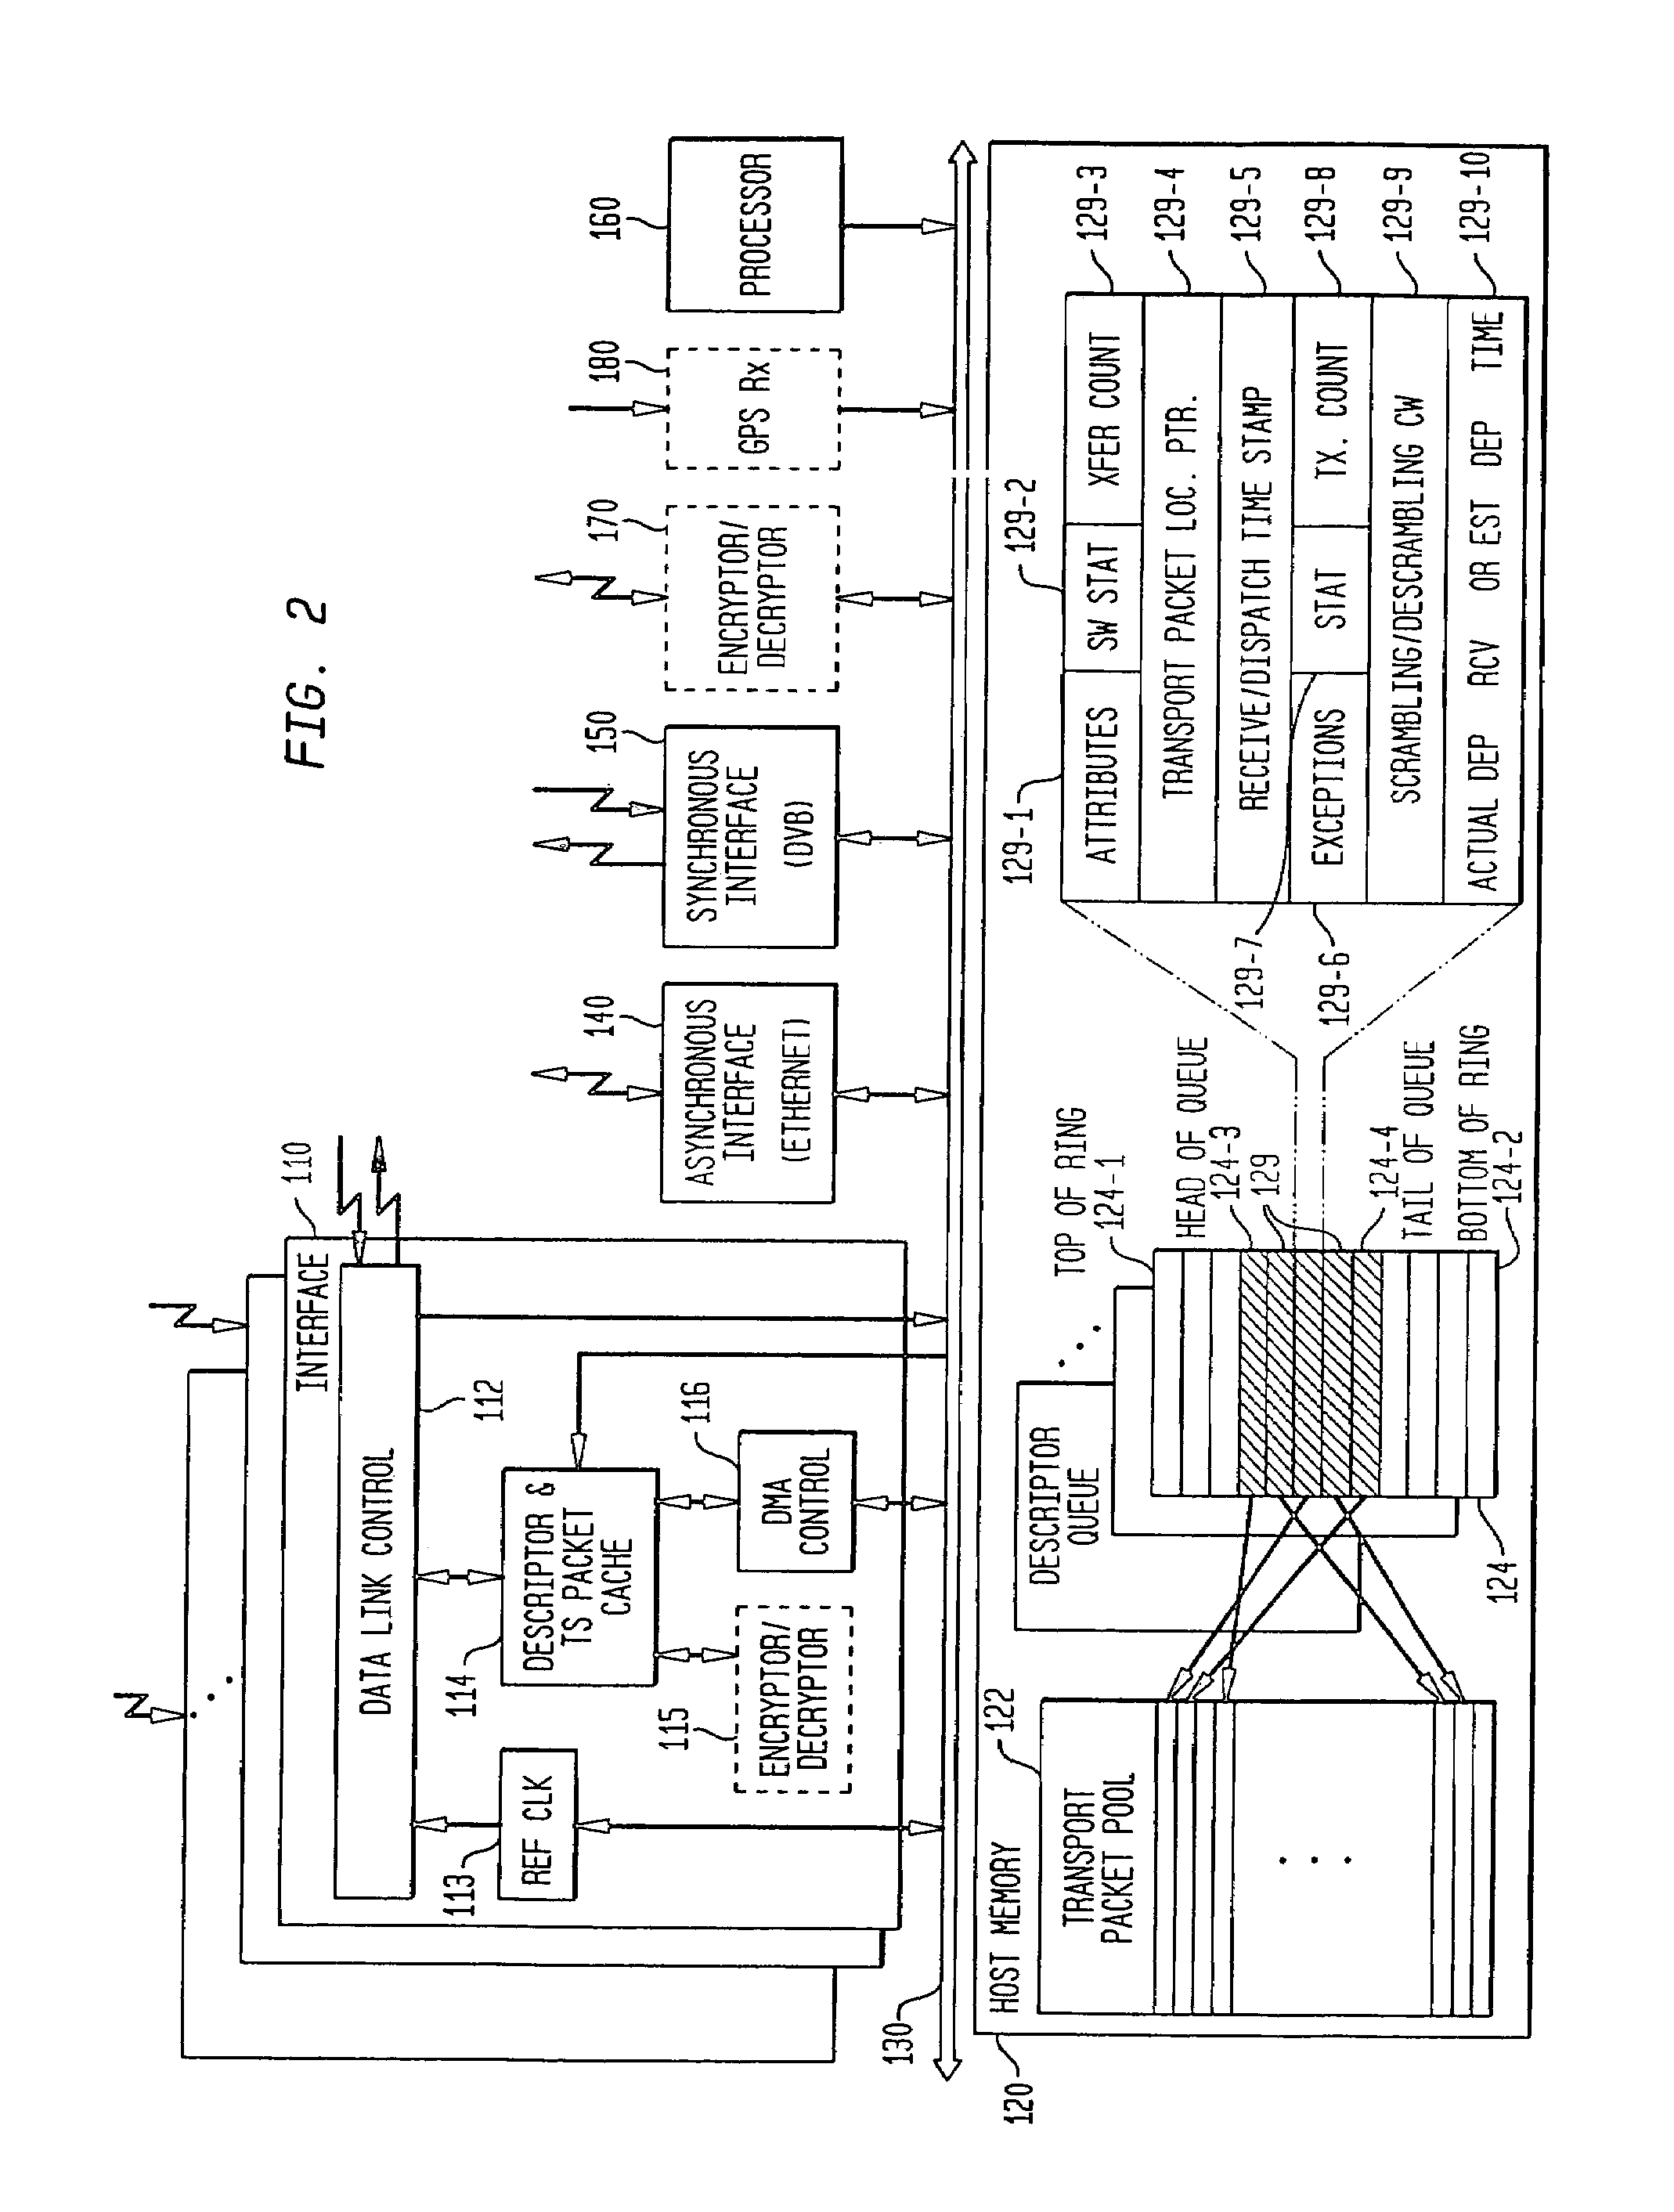 Video remultiplexer for dynamic remultiplexing, multi-mode operation and jitter reduced asynchronous communication